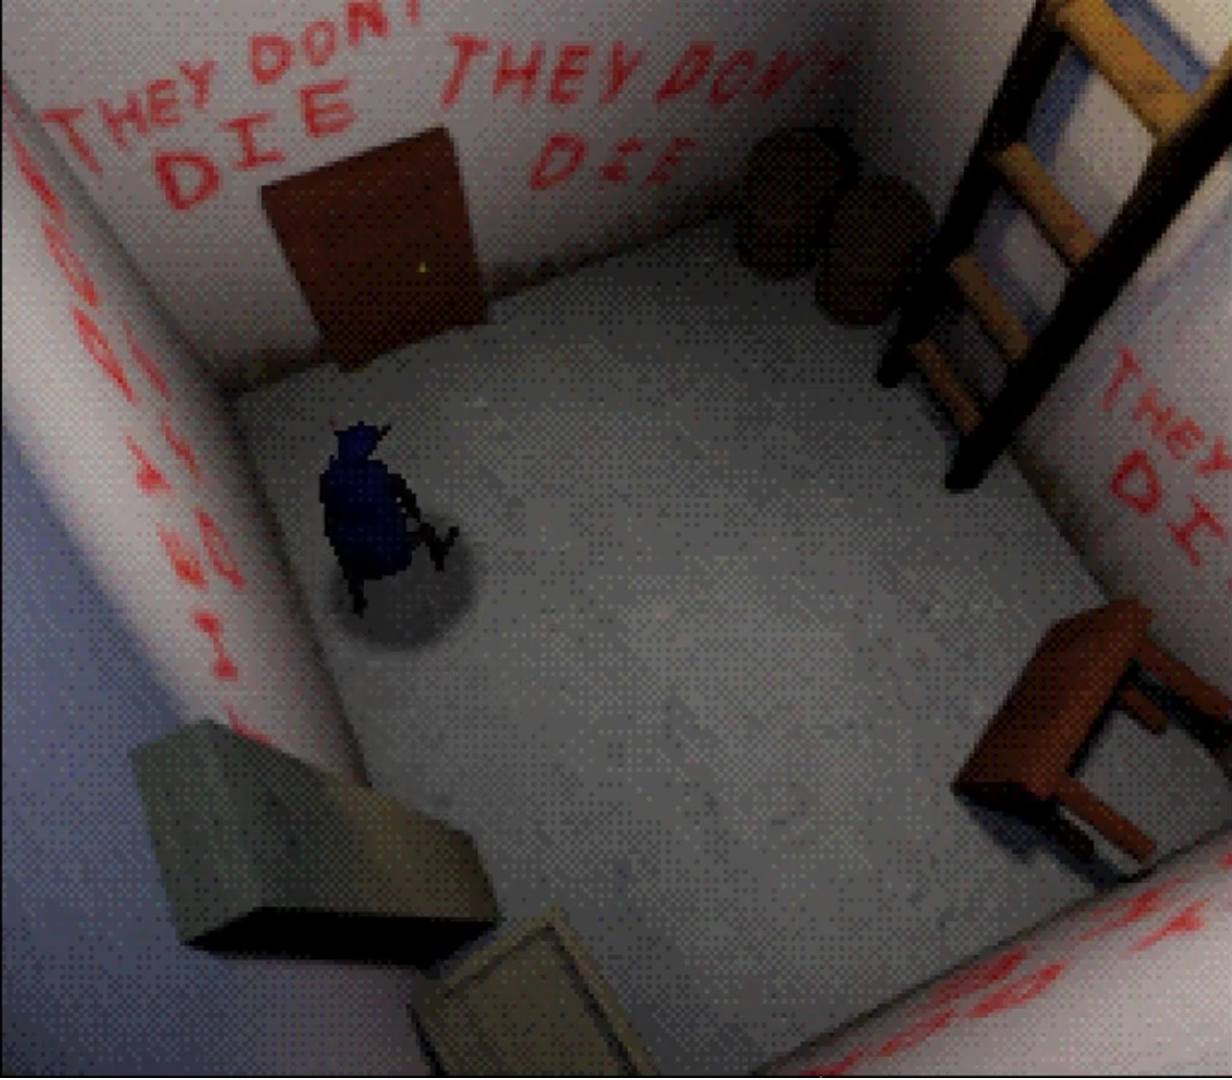 The room in question, referencing the invincible enemies.